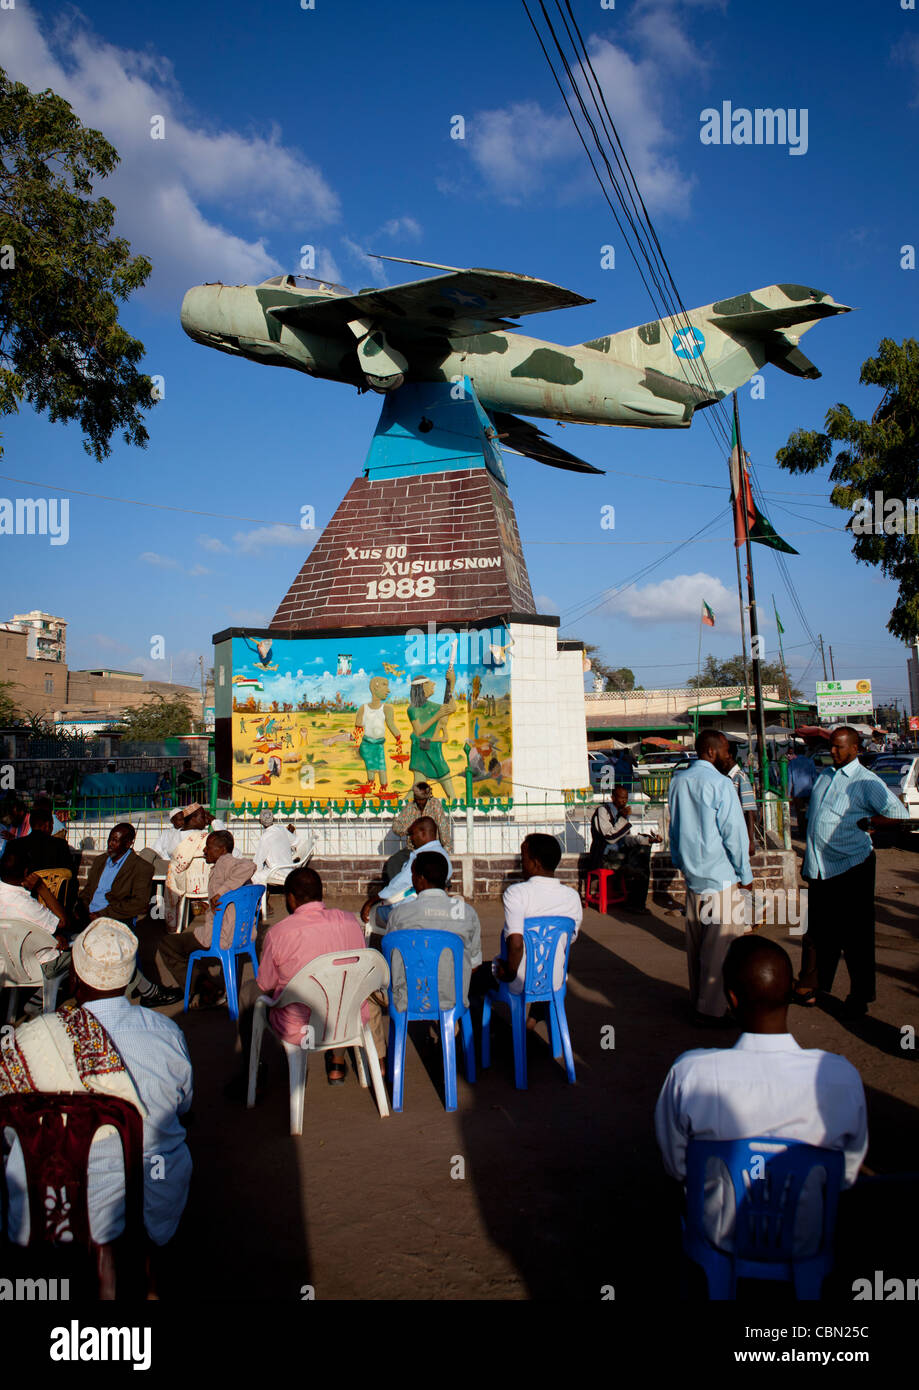 Fighter Jet Plane At The Entrance Of War Memorial Museum In Hargeisa Somaliland Stock Photo